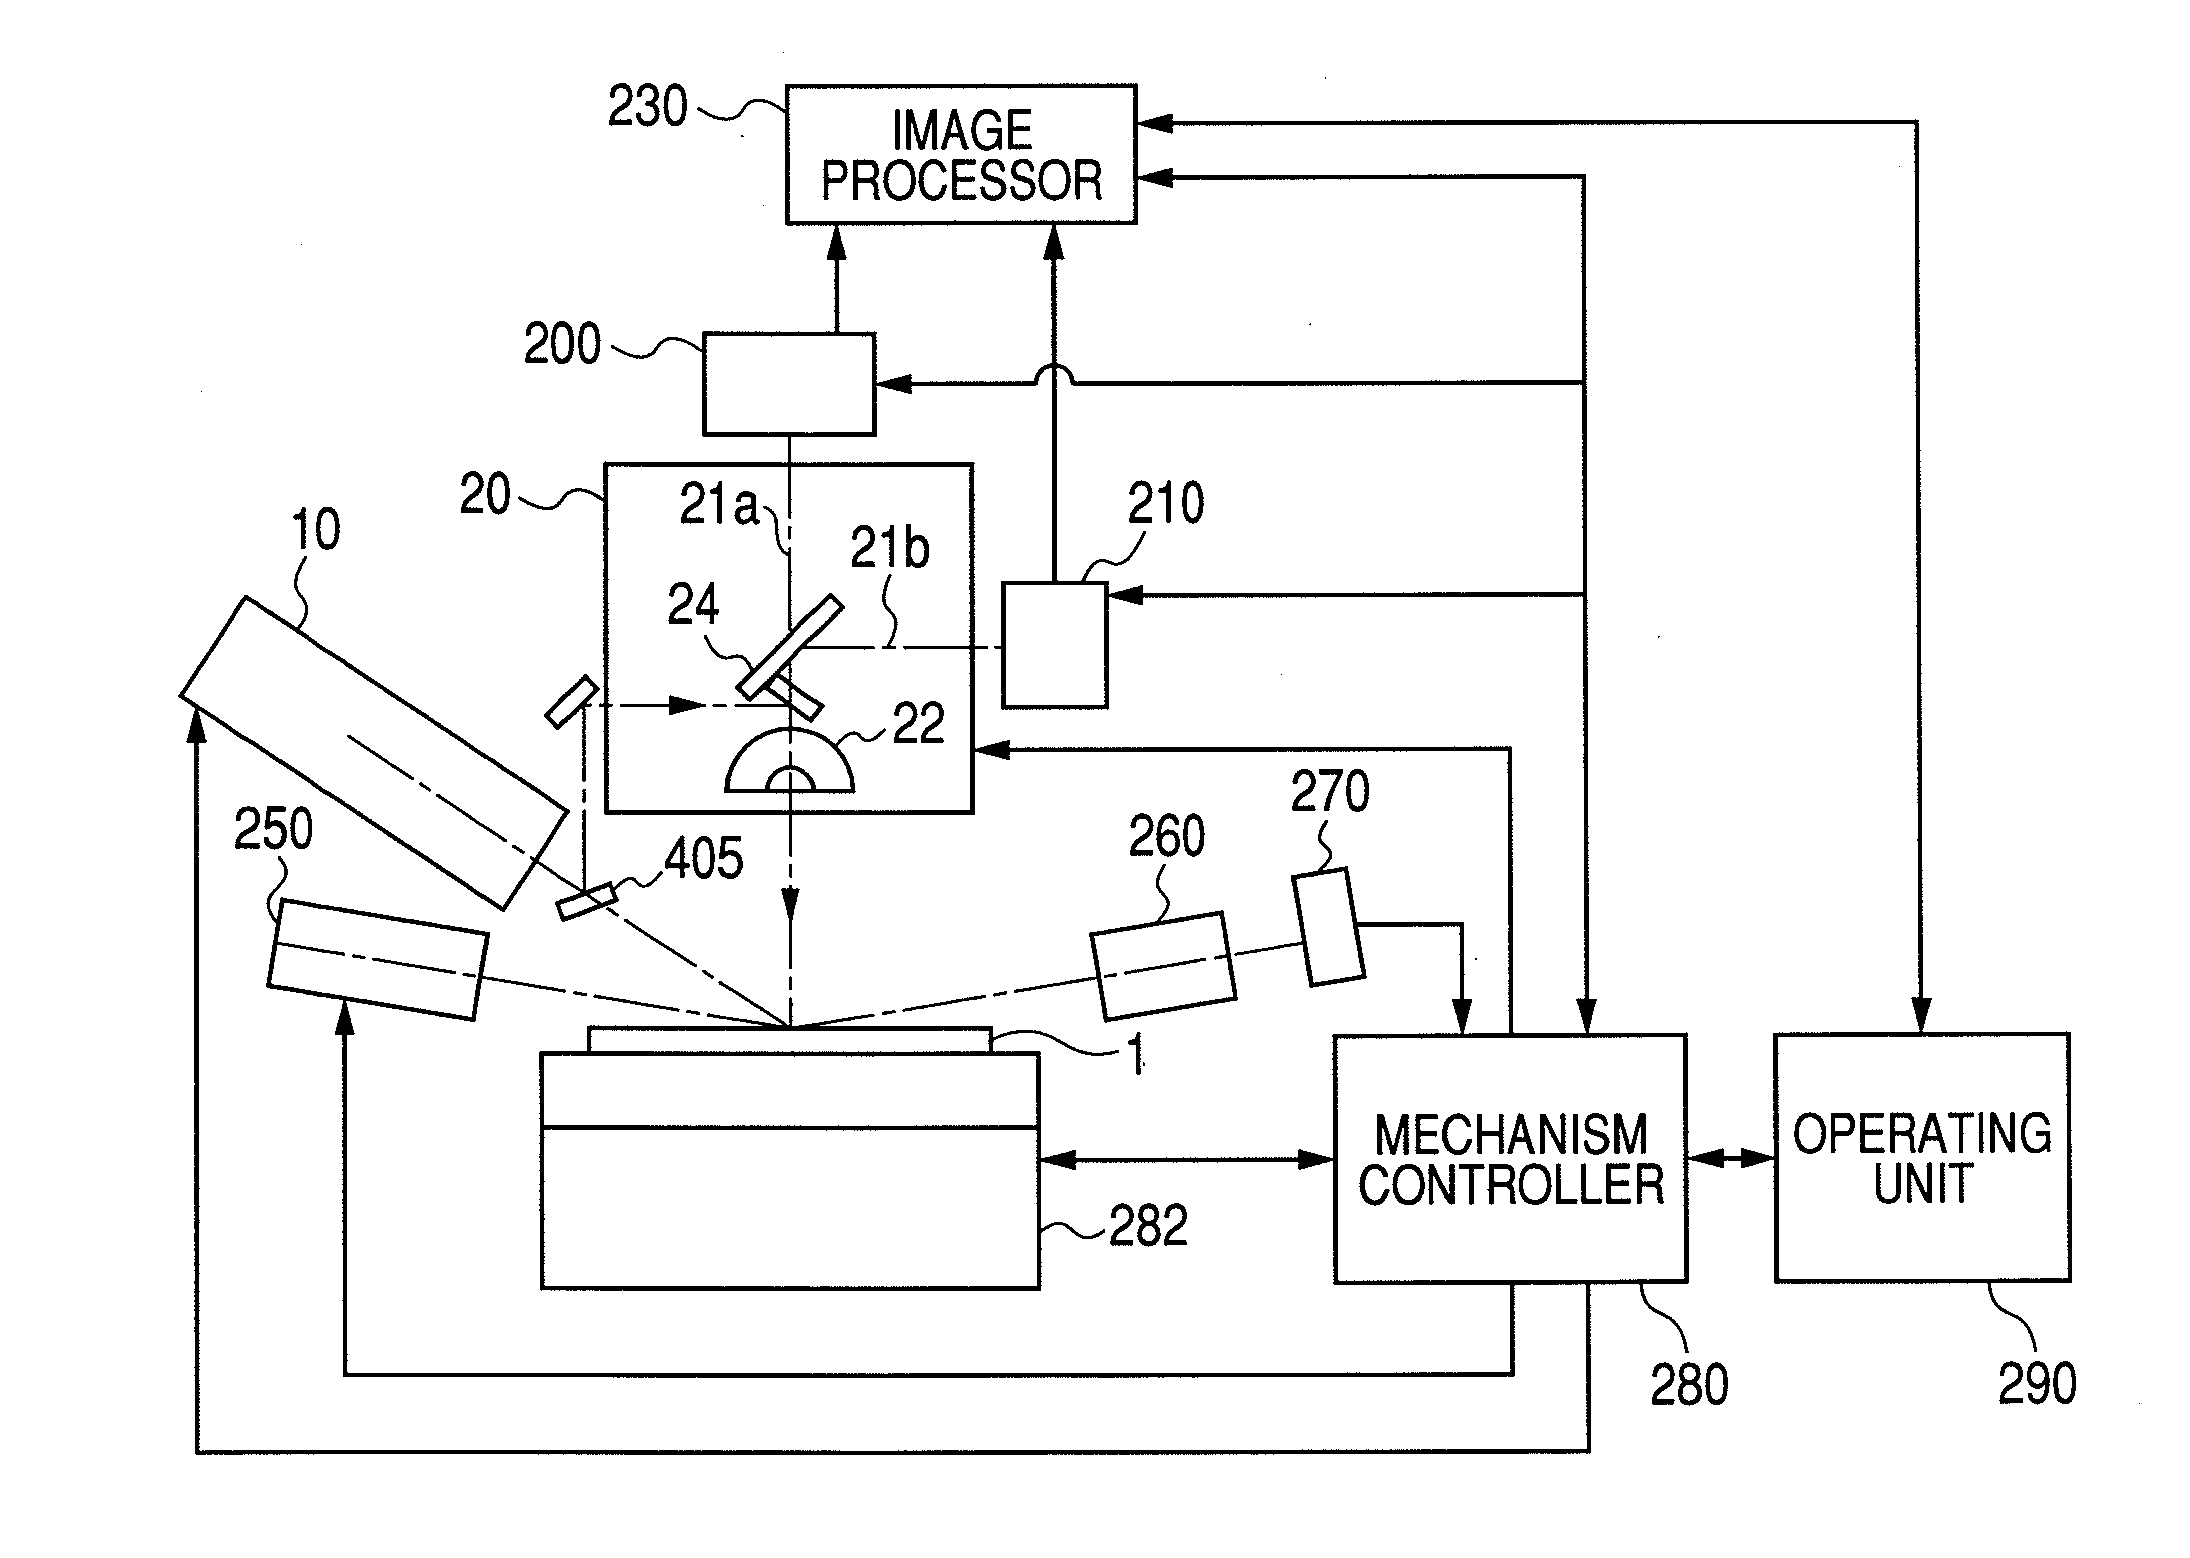 Apparatus for inspecting defects